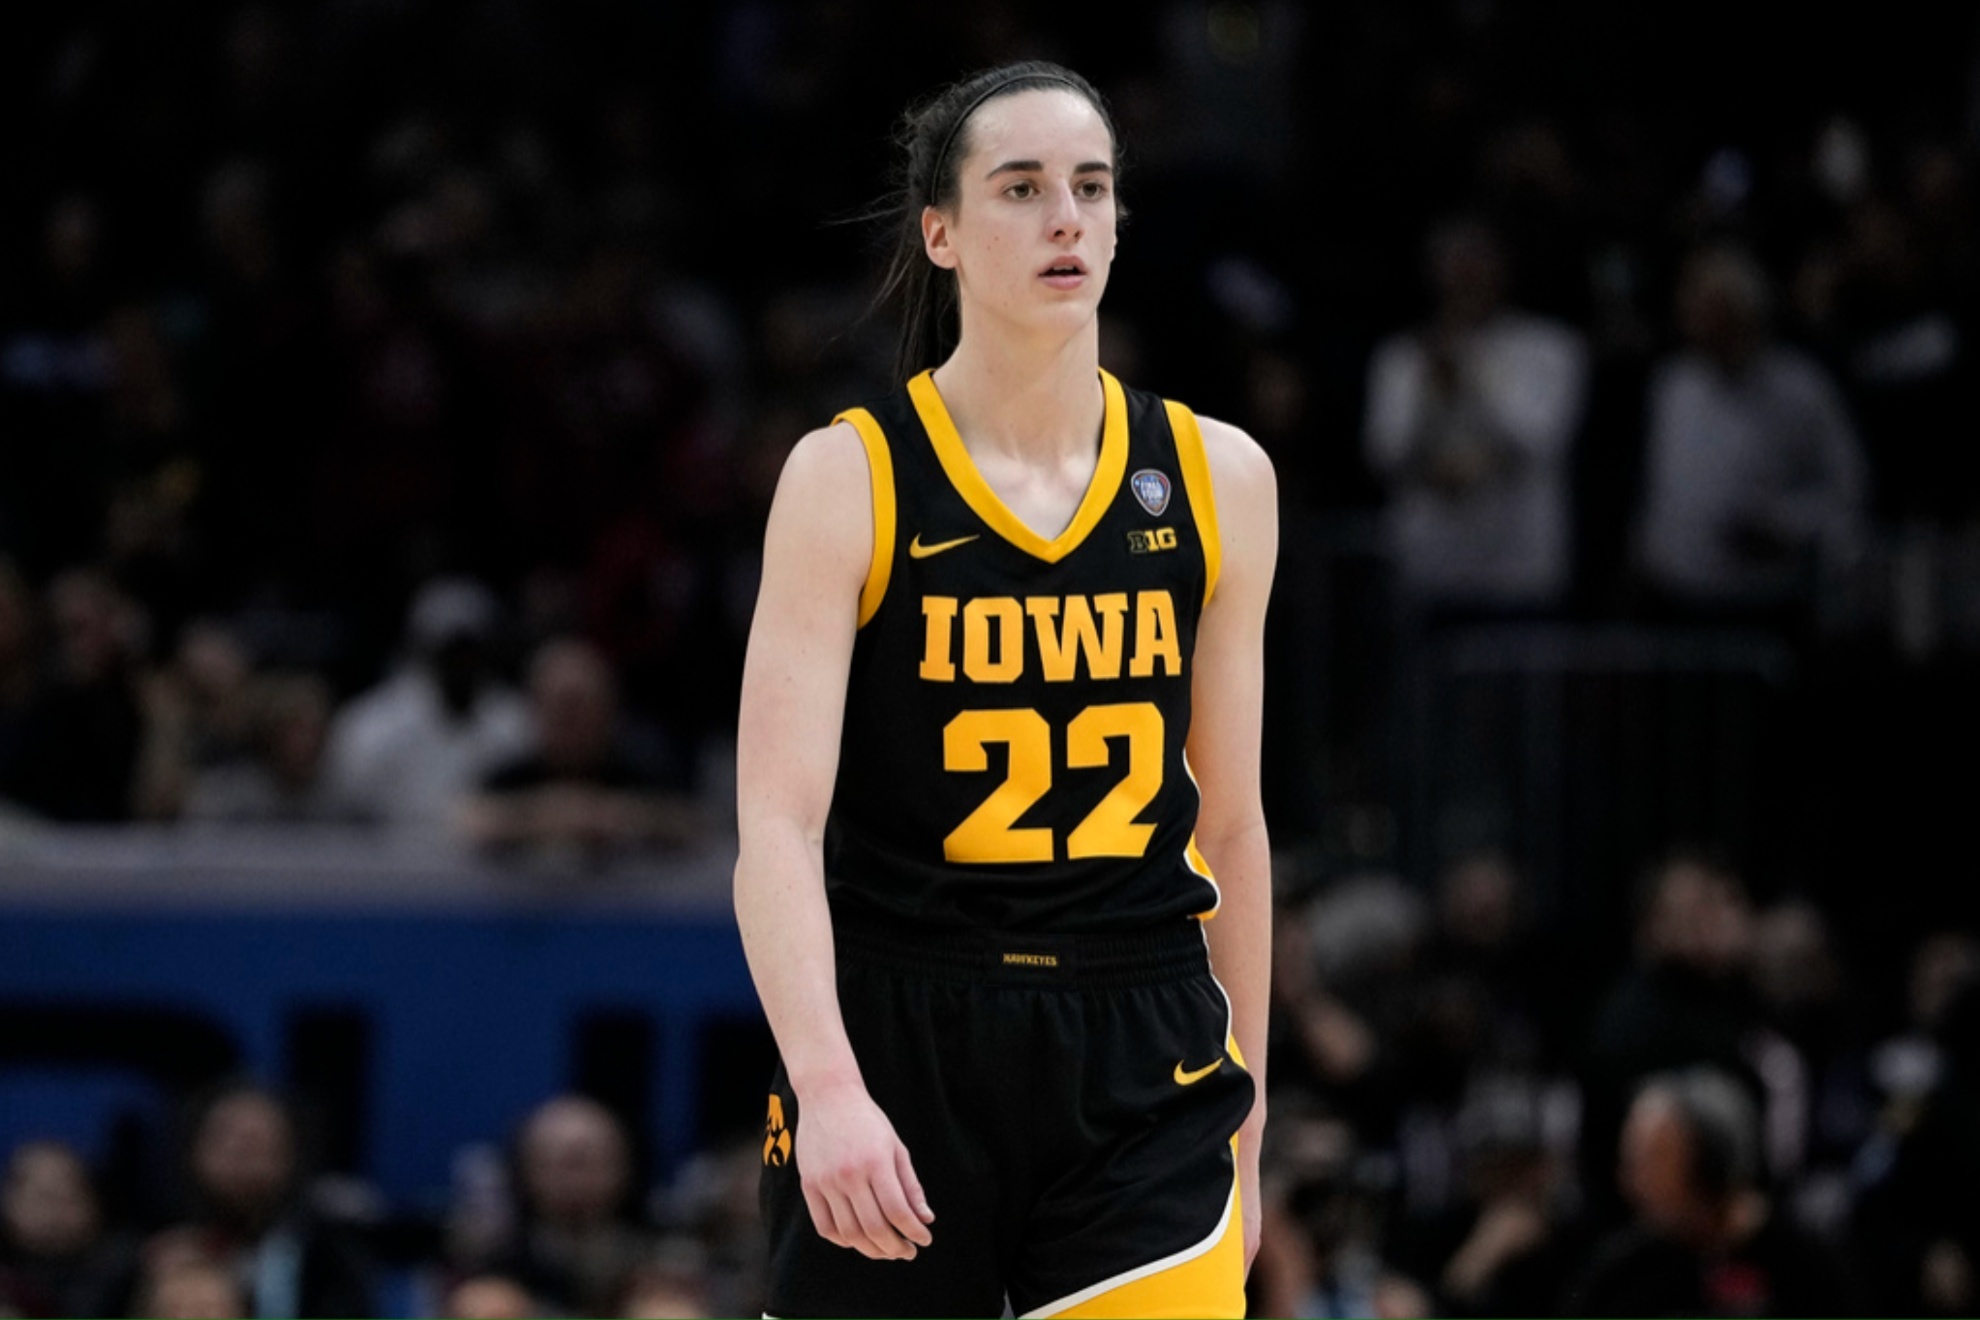 Caitlin Clarks 30 points were not enough to lead Iowa to the championship.